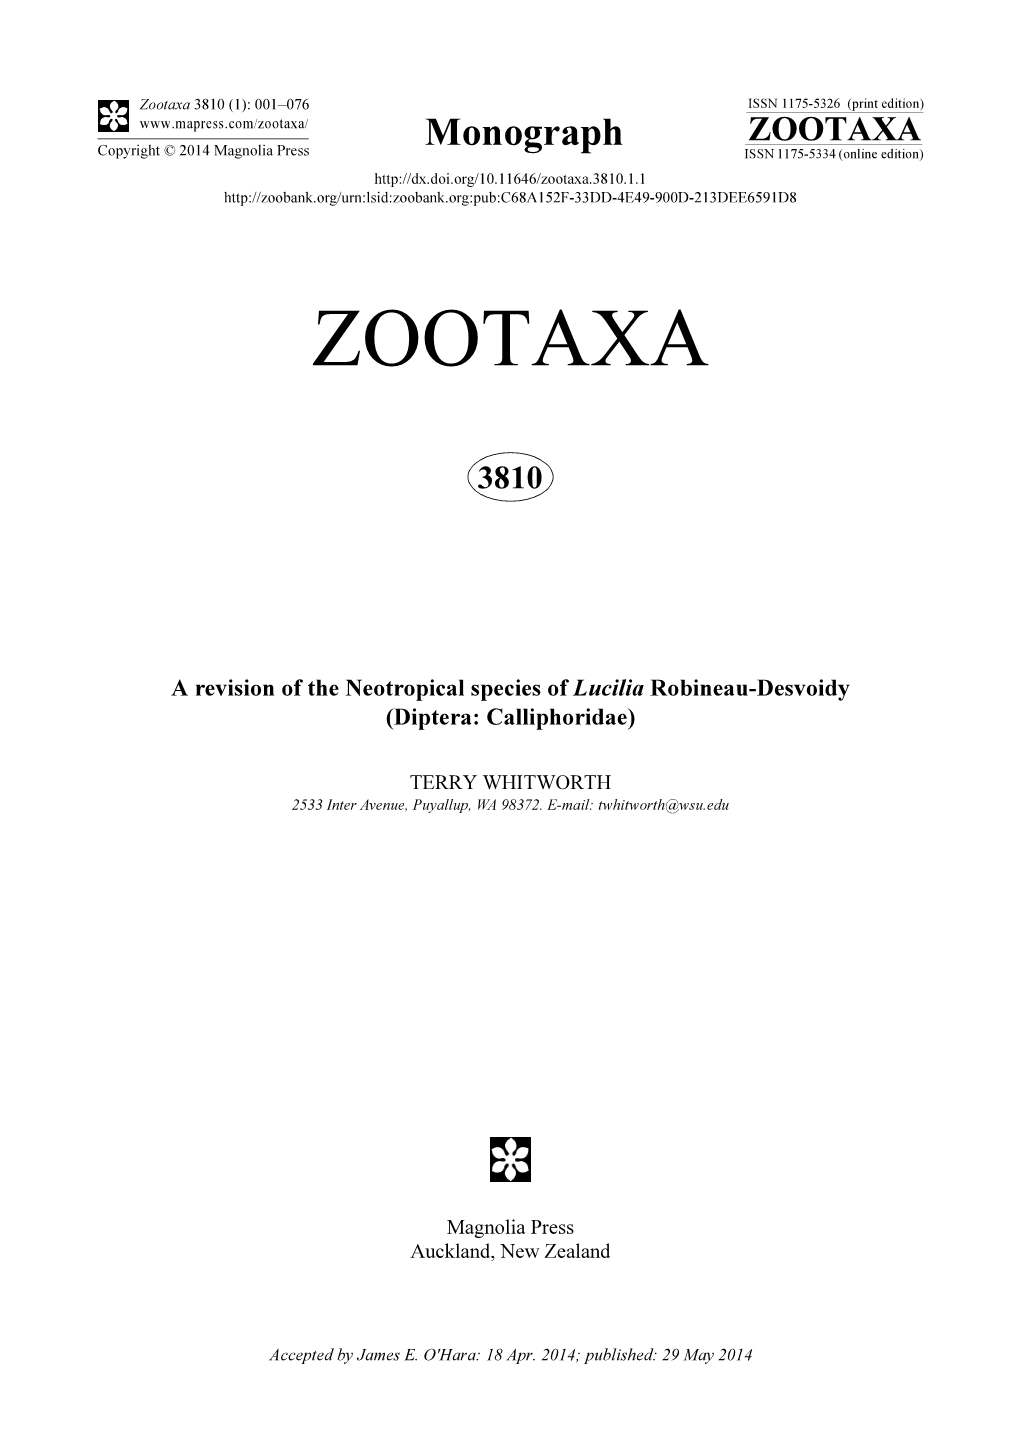 A Revision of the Neotropical Species of Lucilia Robineau-Desvoidy (Diptera: Calliphoridae)